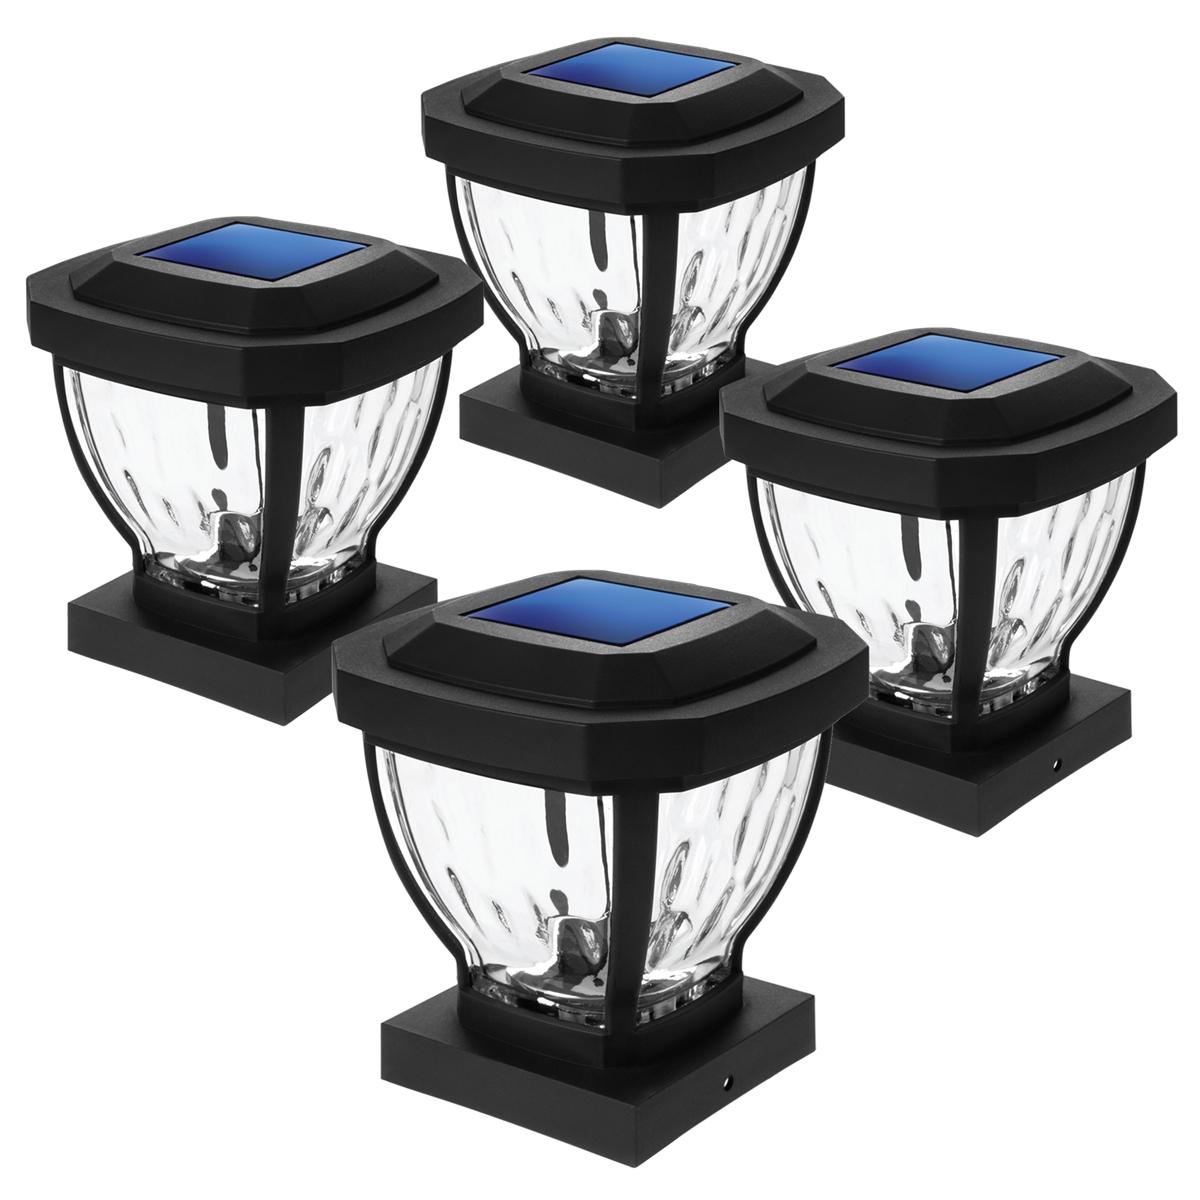 4 Home Zone Security Black Outdoor Solar Decorative Glass for $32.99 Shipped